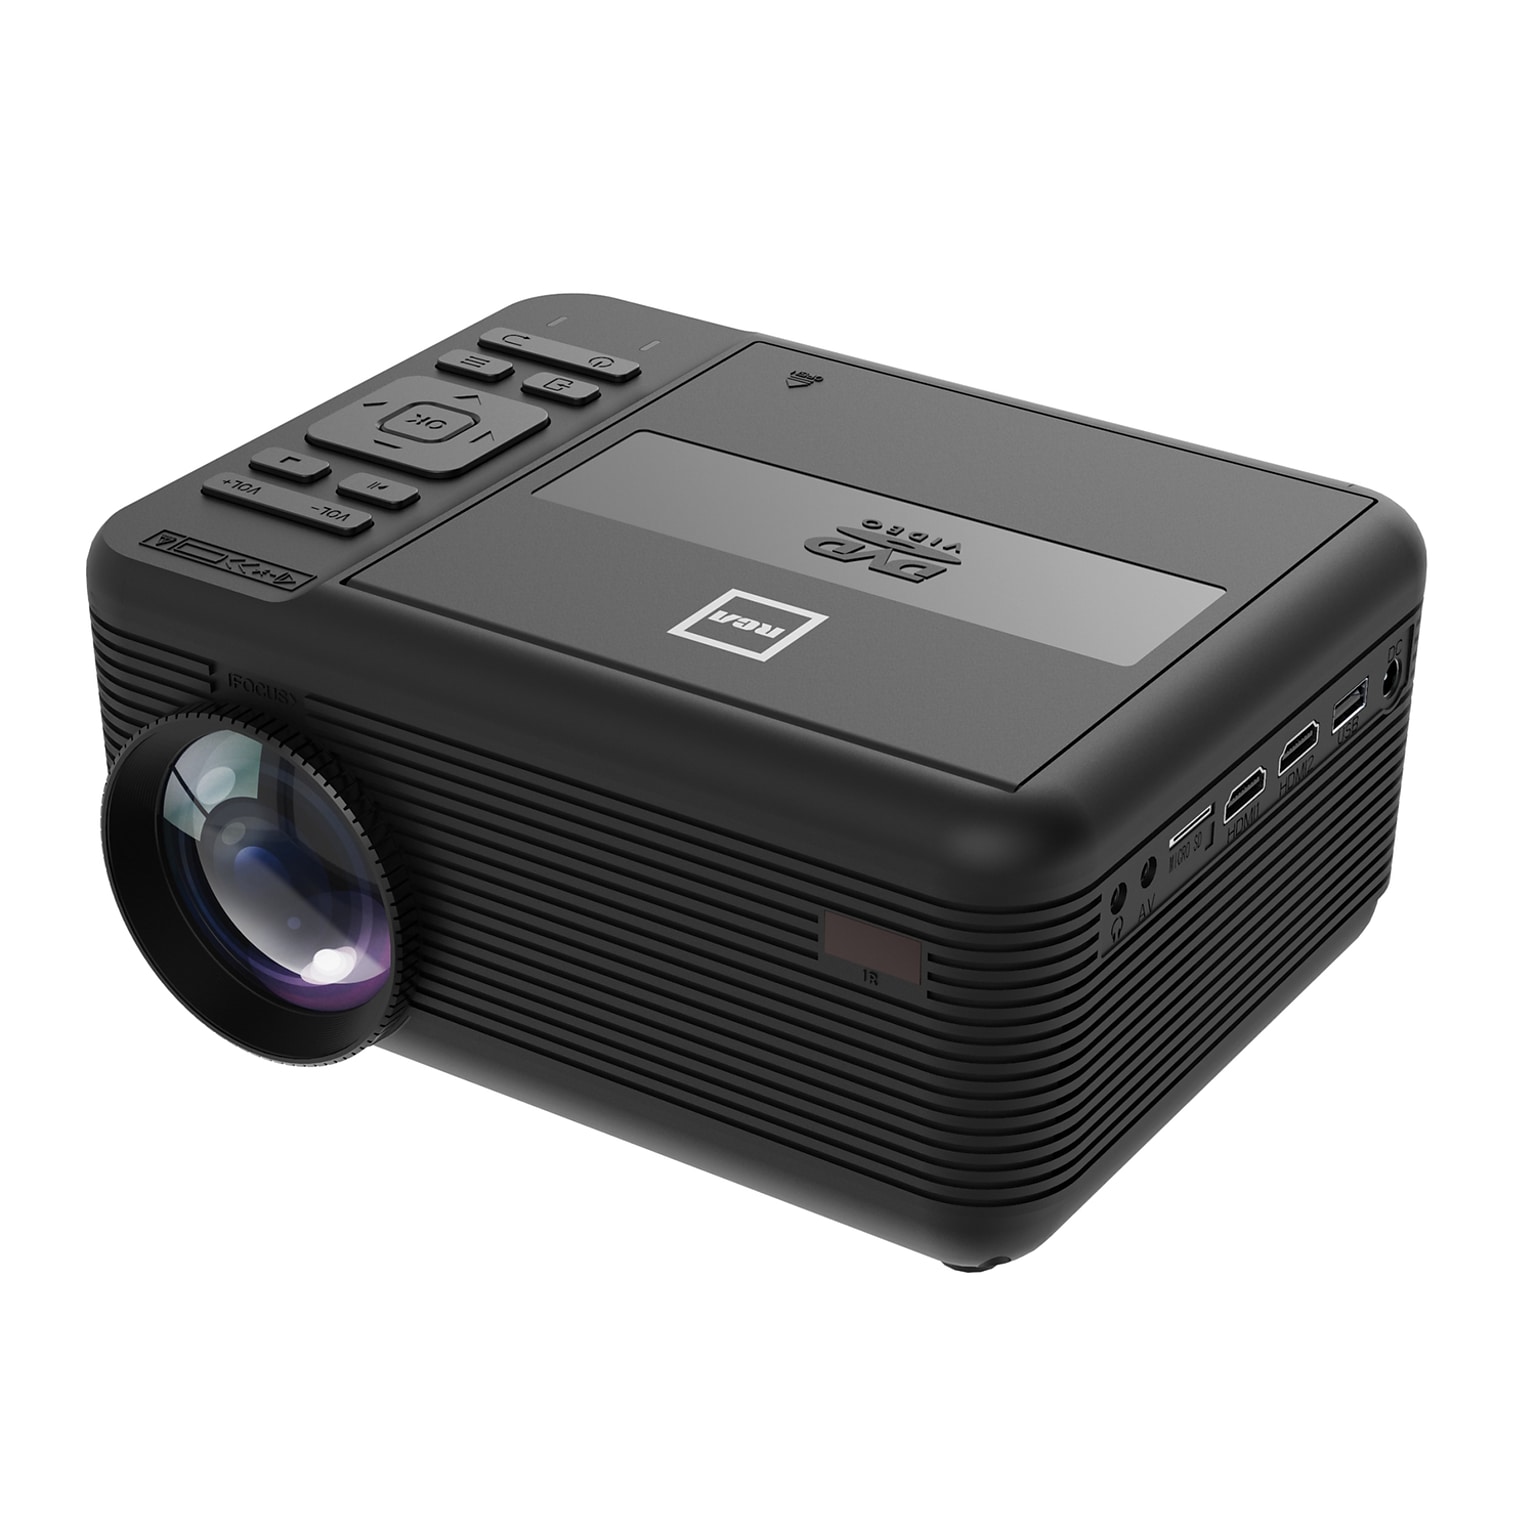 RCA Wireless Bluetooth 480p LCD Compact Projector with Built-in DVD Player, 100 Foldup Screen & Remote, Black (RPJ241-COMBO)